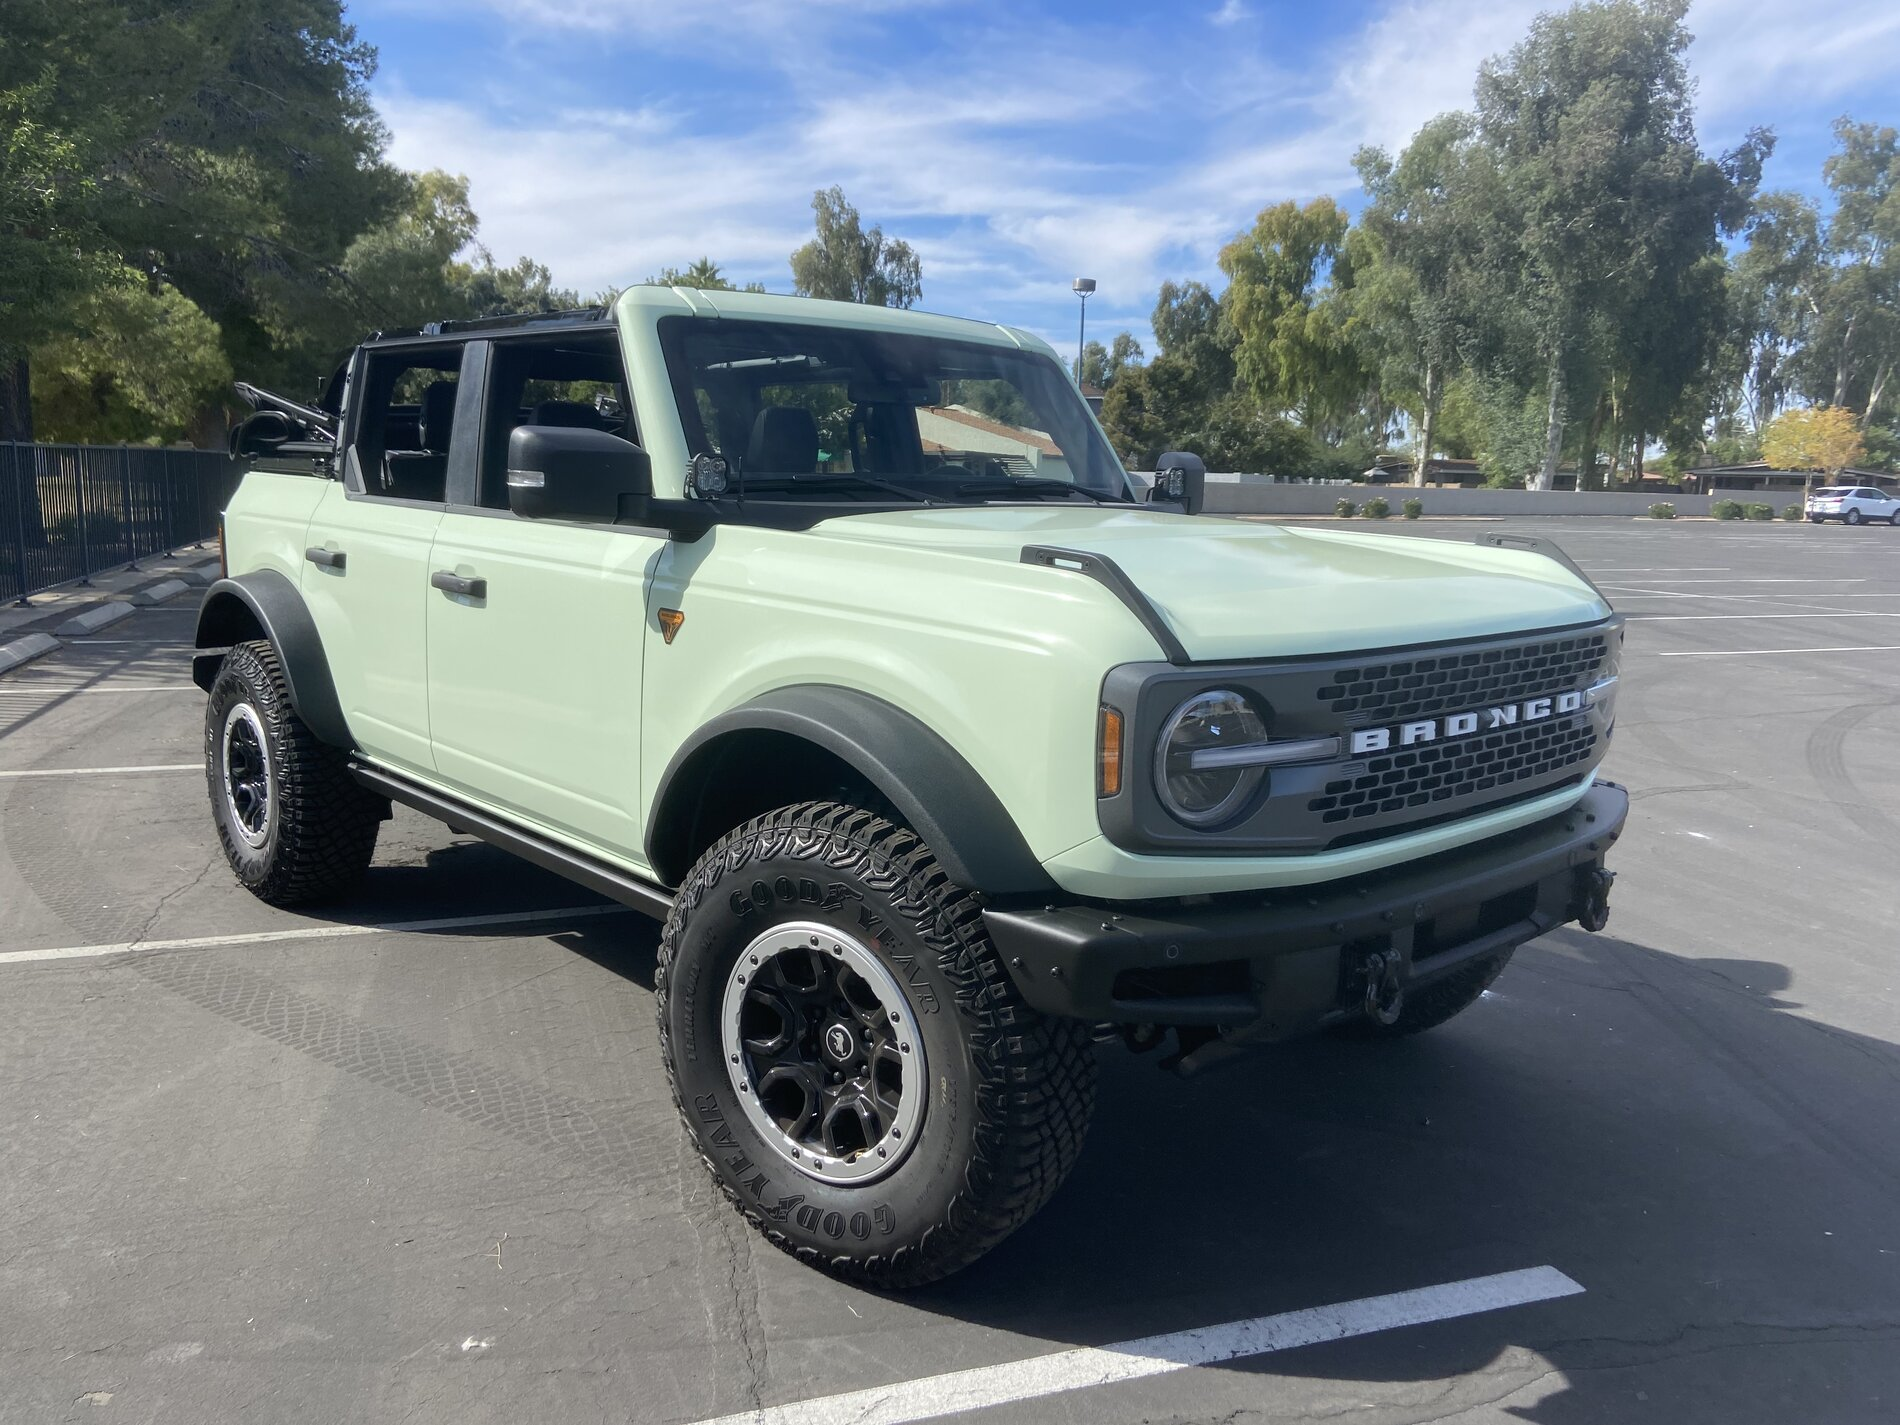 Ford Bronco I wrapped my Badlands in Light Pistachio Green 1635972986981